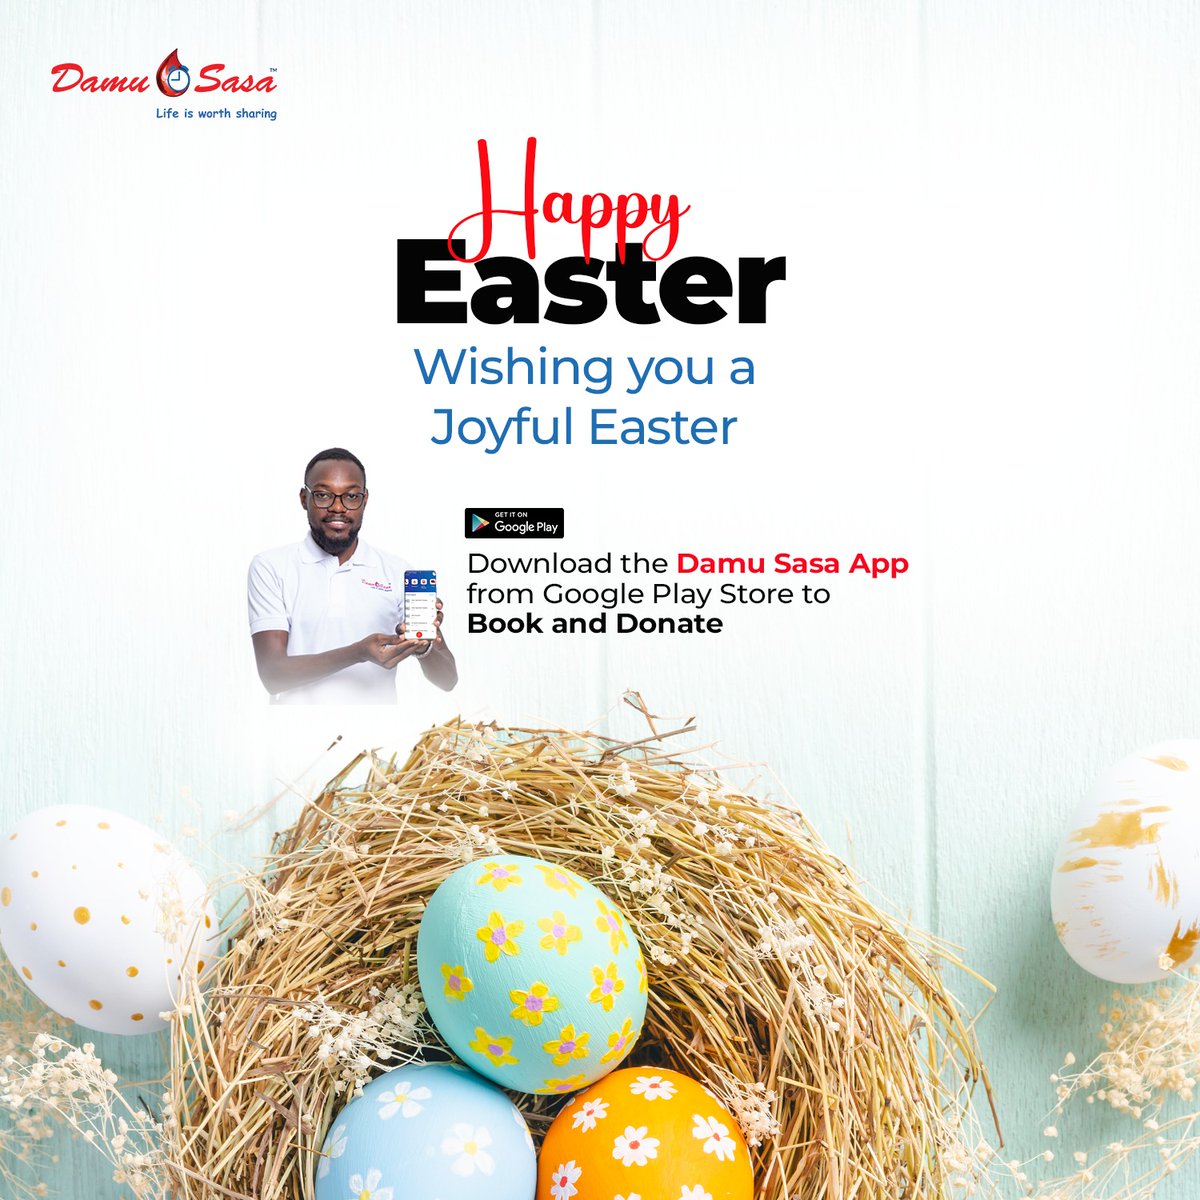 We would like to wish you all love, hope ,and blessings this Easter season for you and your lived ones. Let's remember the gift of life and the importance of giving back to the community .Happy Easter!

#Damusasa #EasterSeason2024